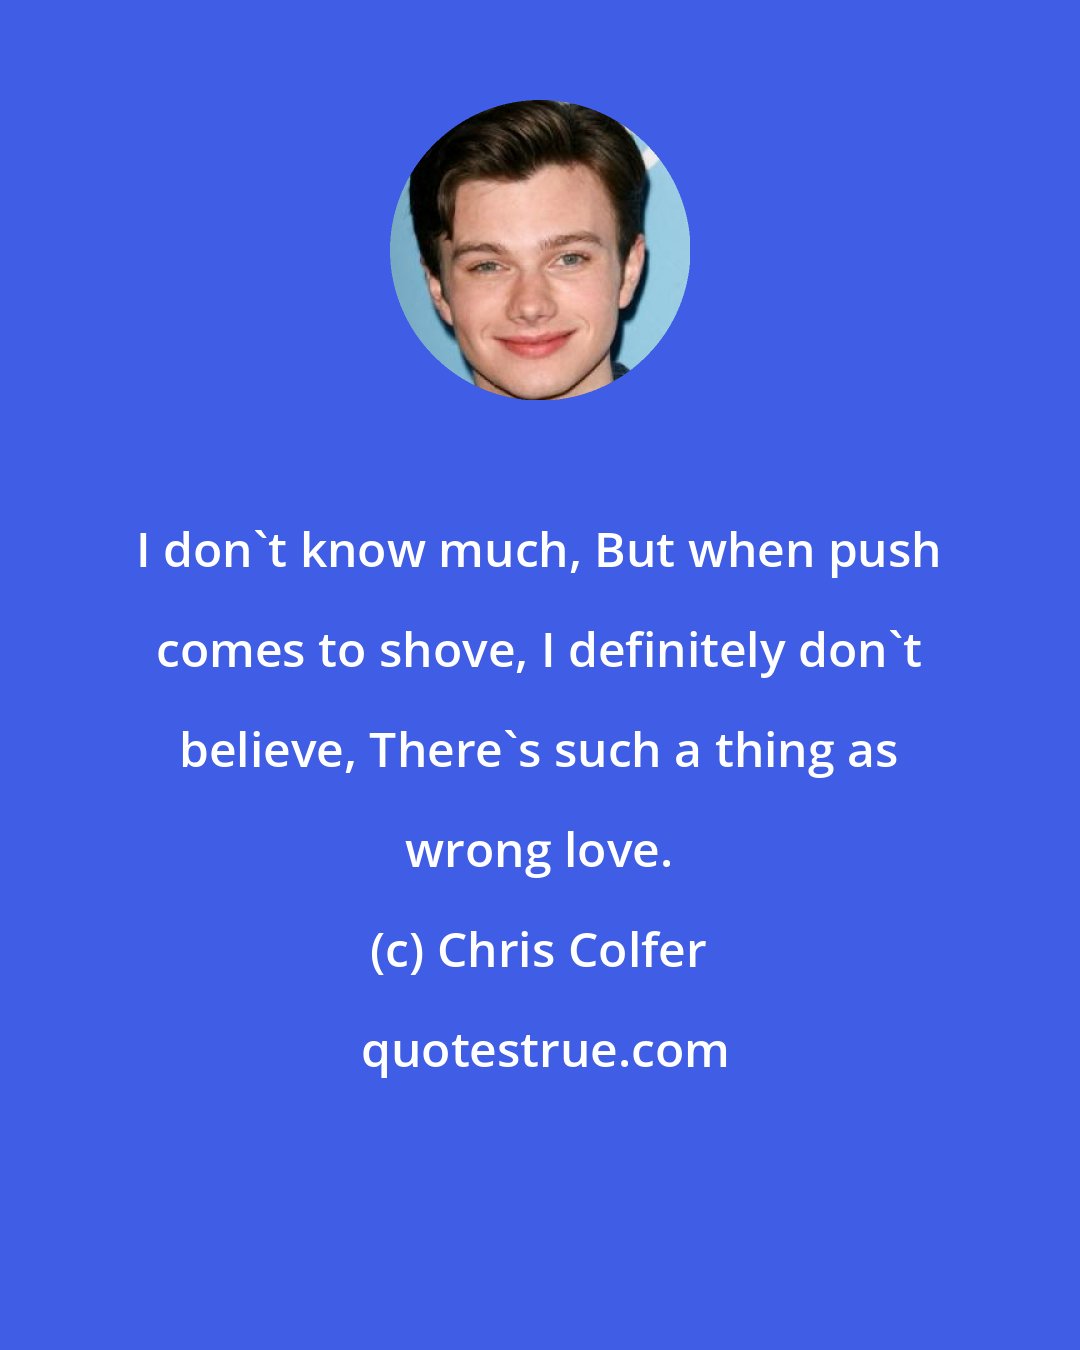 Chris Colfer: I don't know much, But when push comes to shove, I definitely don't believe, There's such a thing as wrong love.